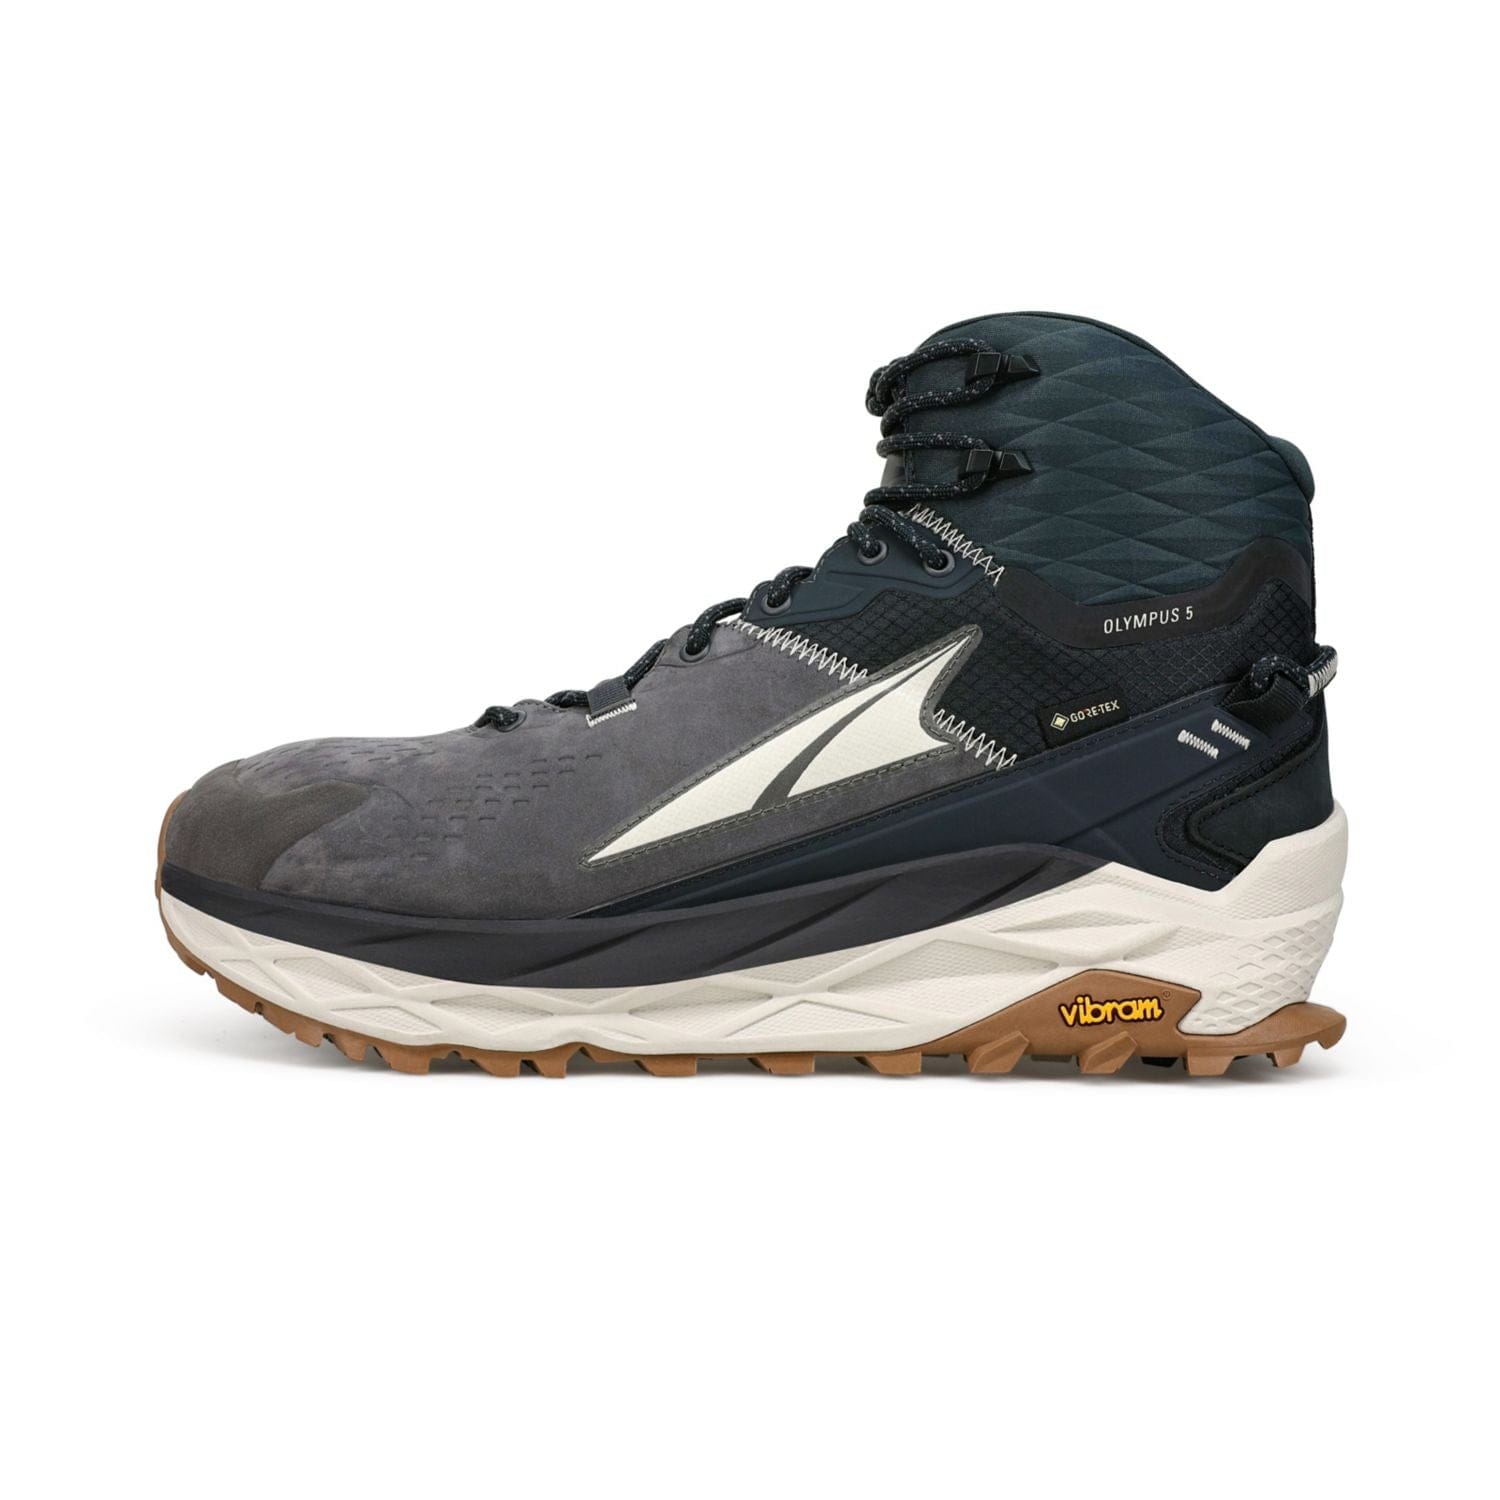 Altra Olympus 5 Hike Mid Gtx [Men's] Shoes - Blister Prevention